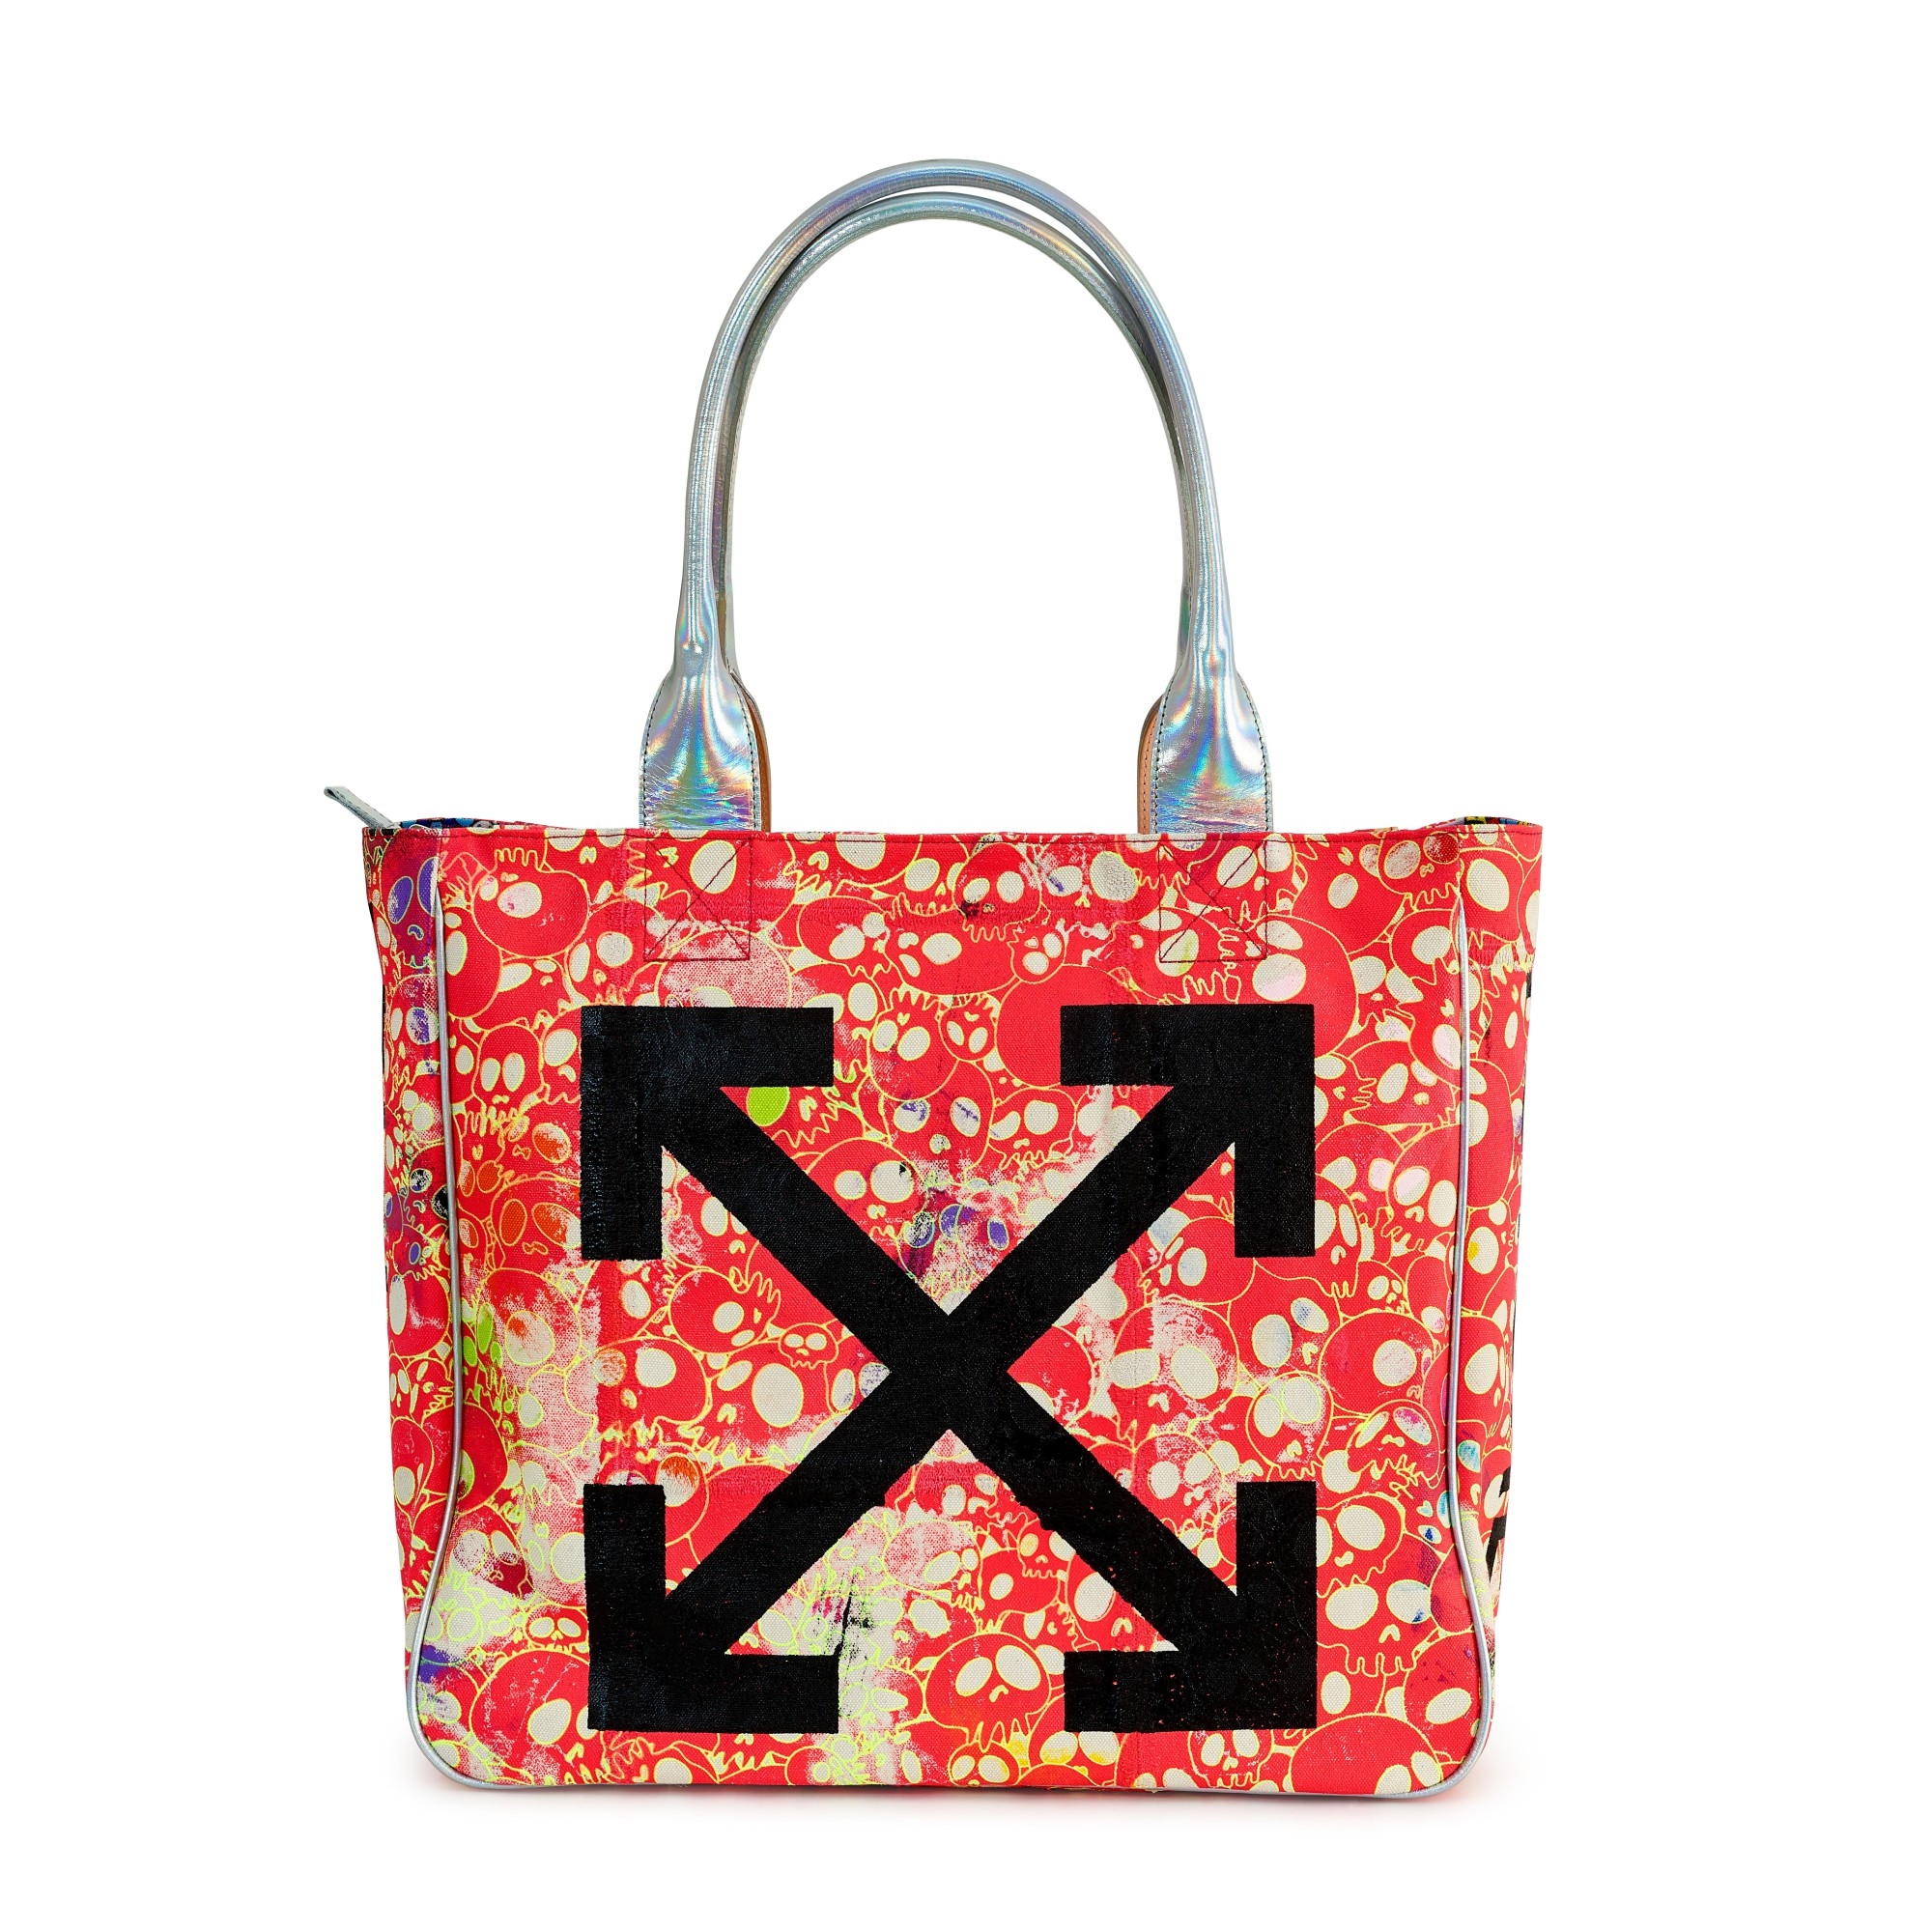 Gold and Black Tote Bag in Canvas and Leather, 2018, signed by Murakami and  Abloh, The Art of Giving: The Luxury Wish List, 2020